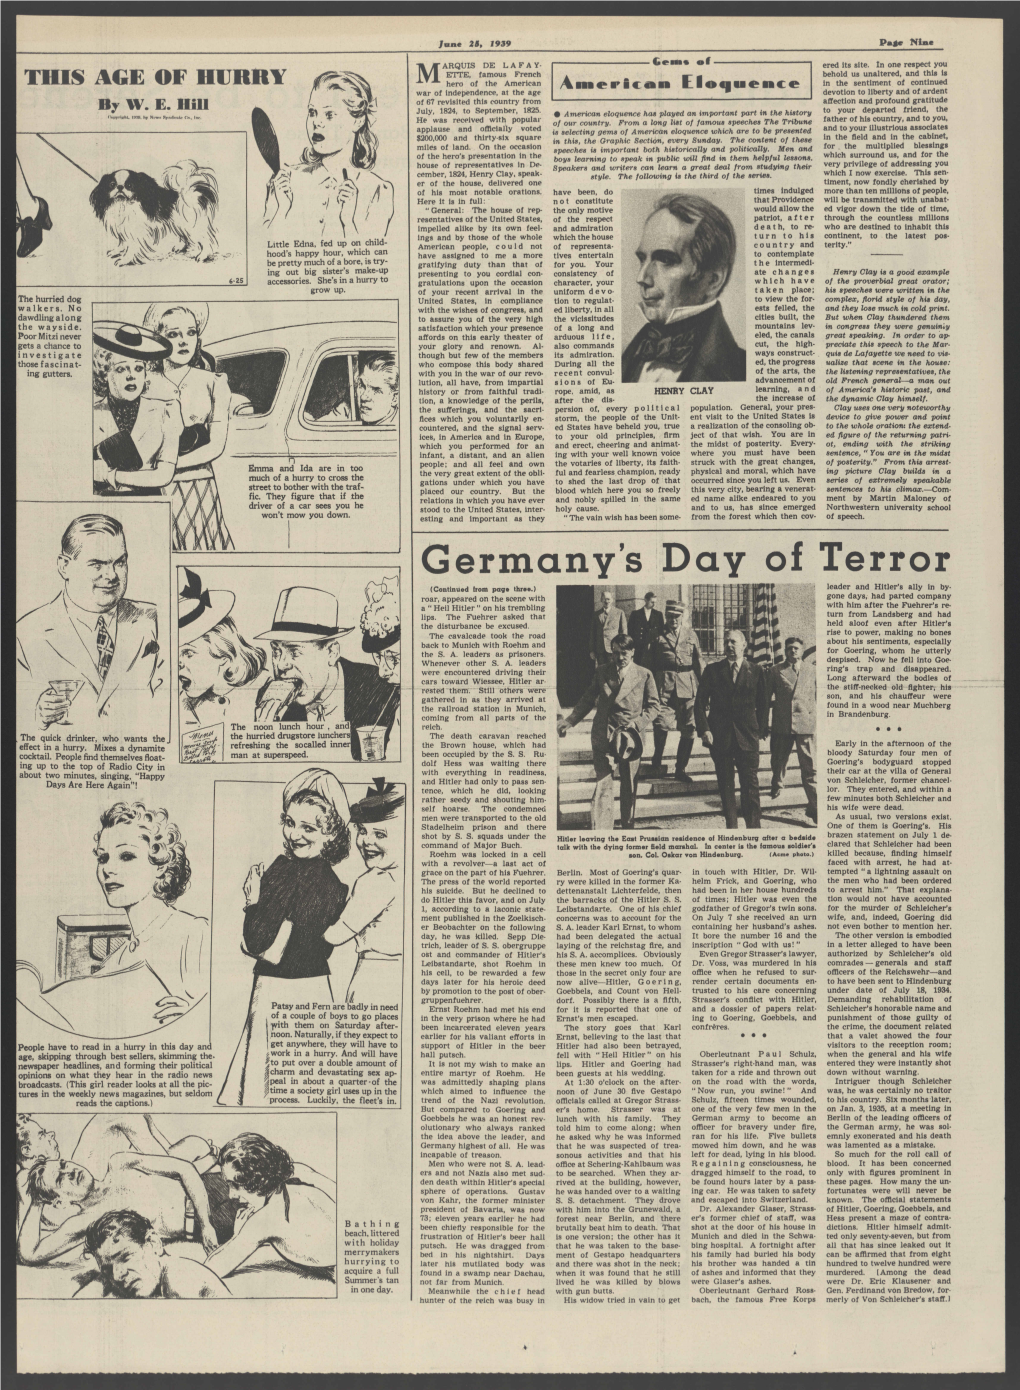 Germany's Day of Terror